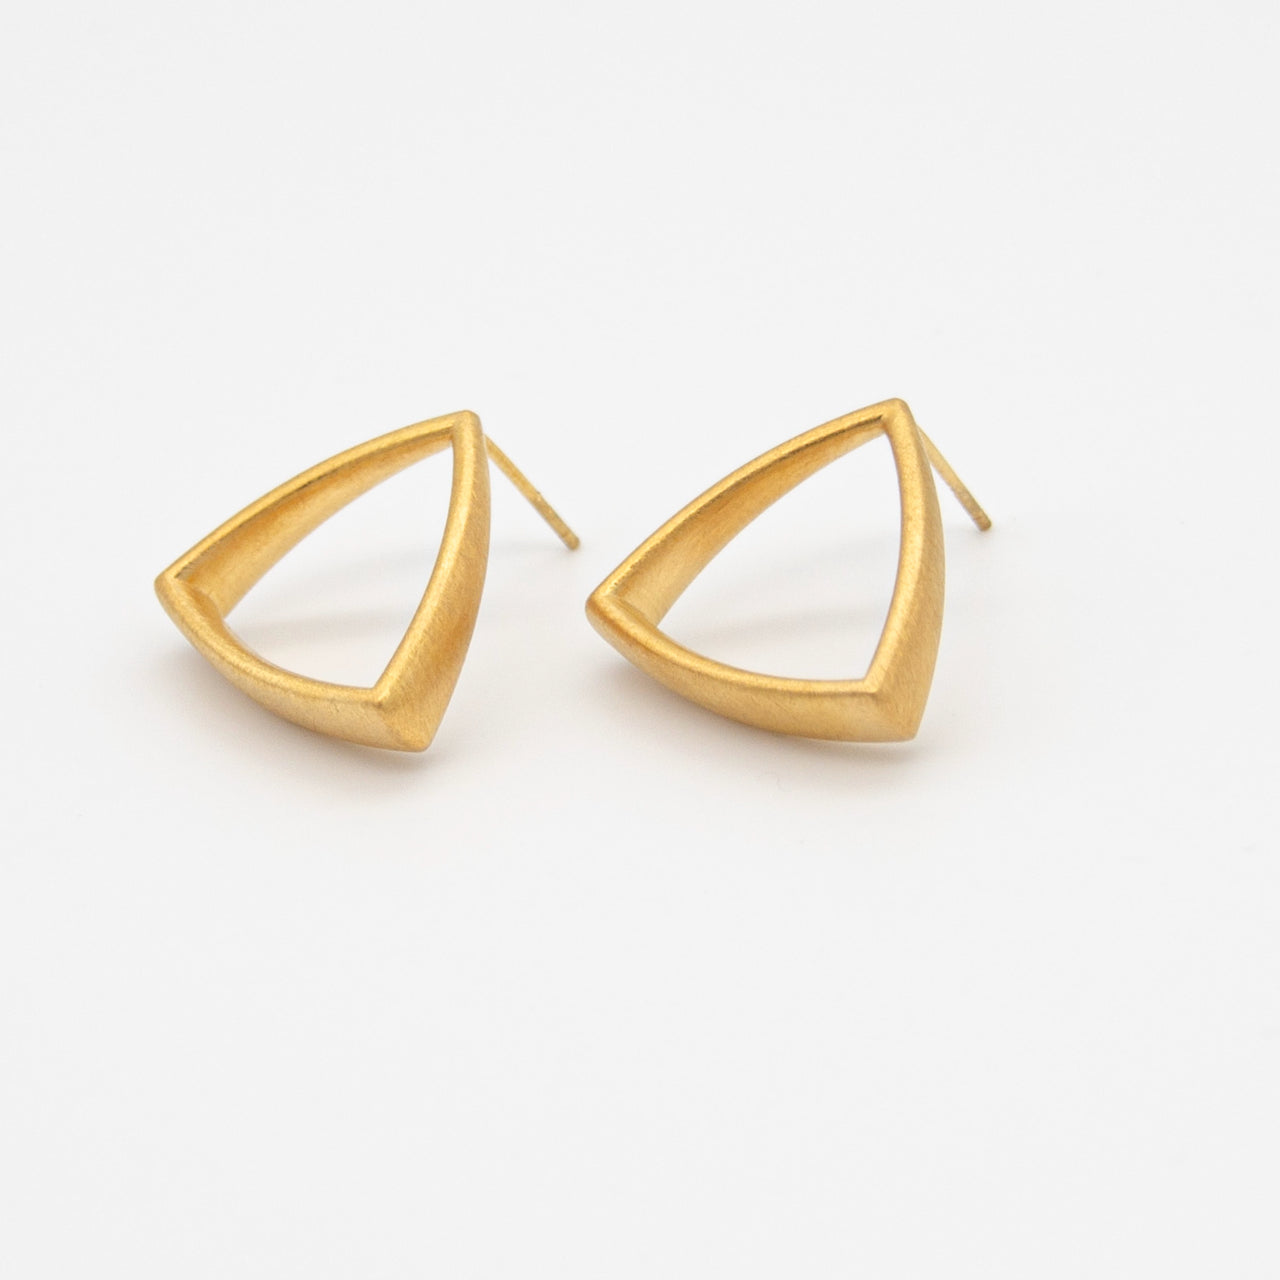 Curved Curves Triangle Earrings Gold